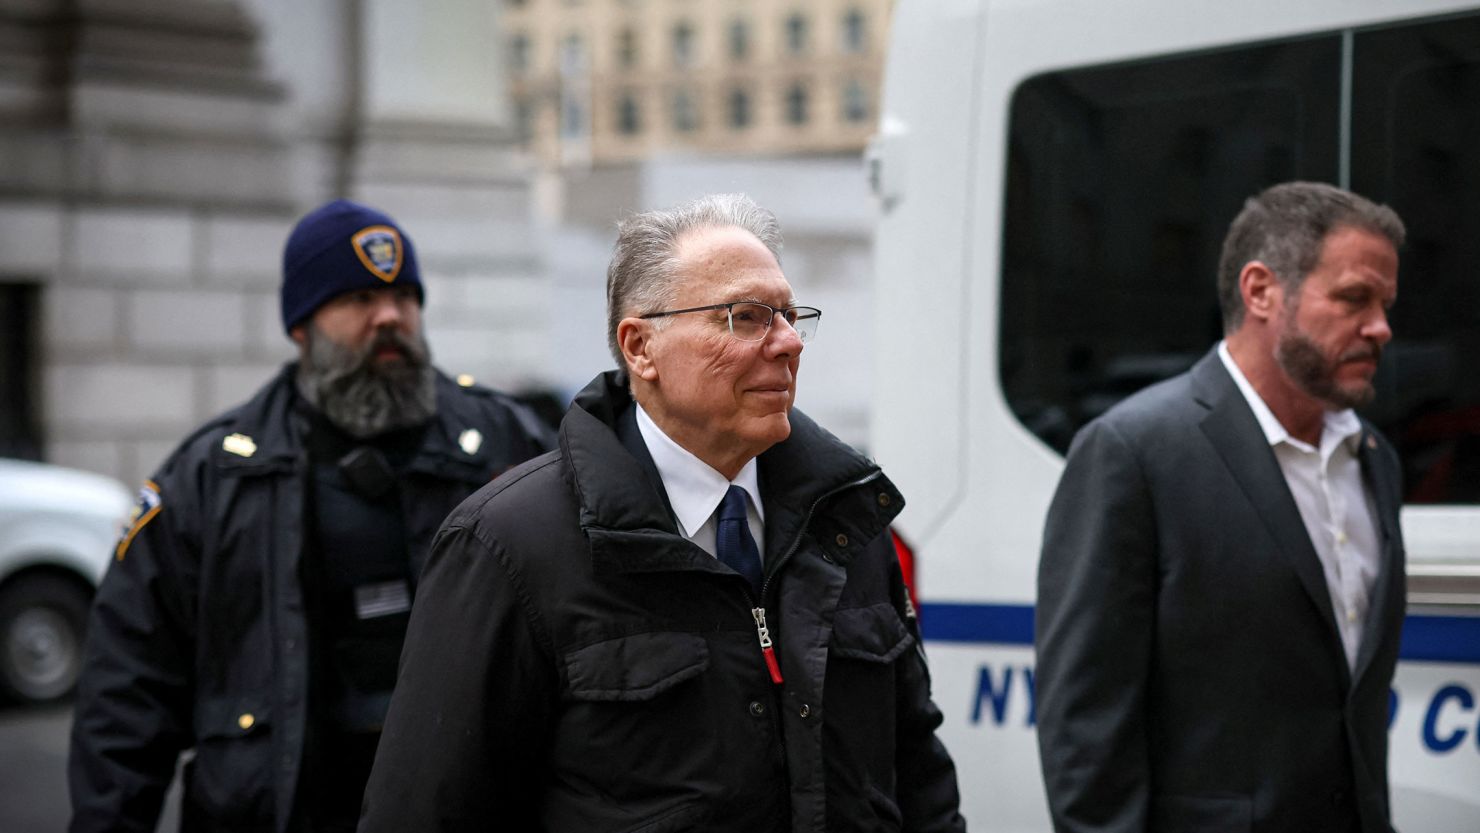 Wayne LaPierre, outgoing CEO of the National Rifle Association, arrives at New York State Supreme Court for a civil corruption trial in New York City on Monday.